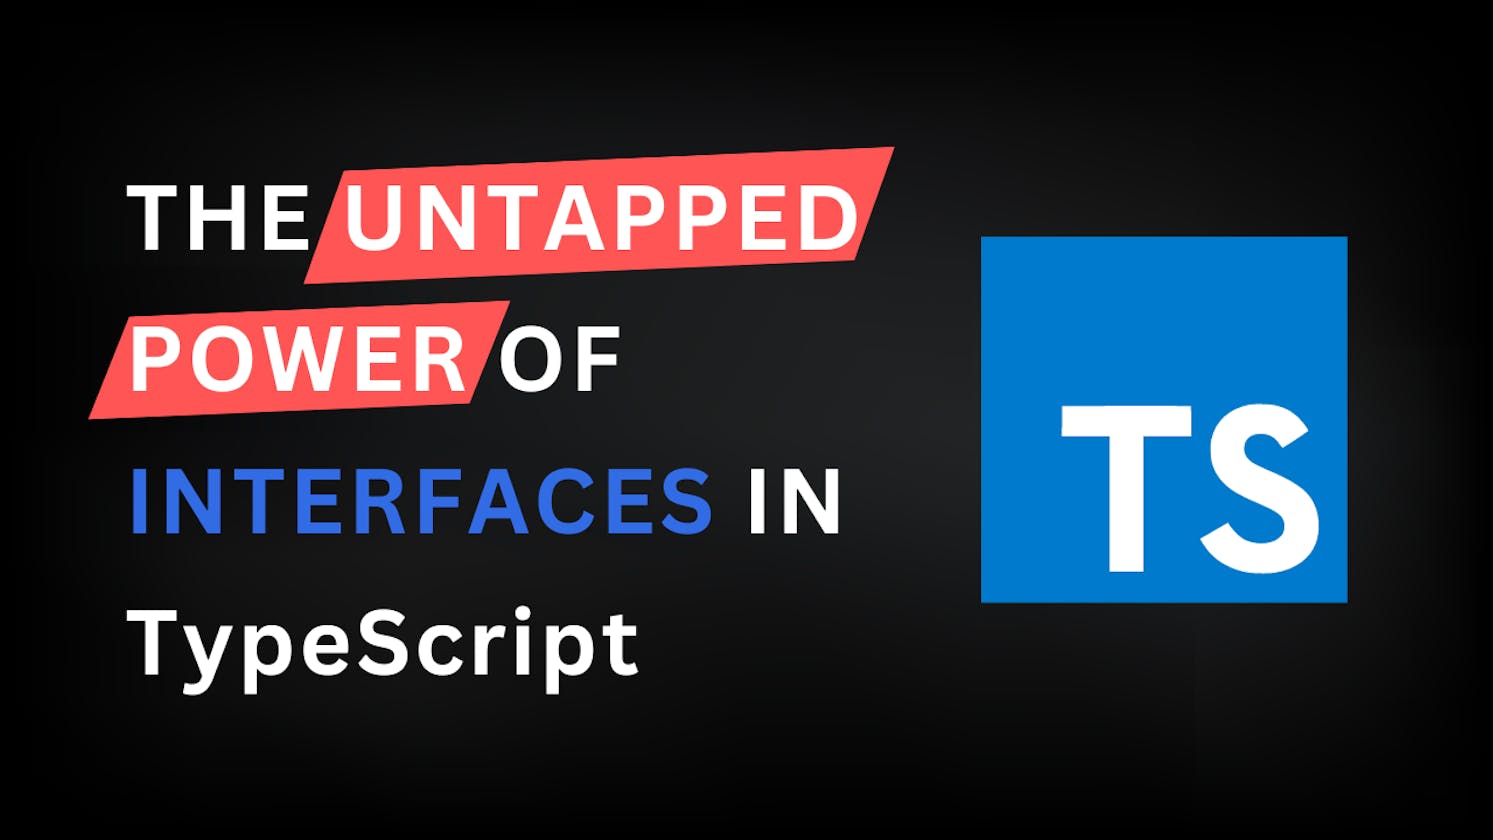 The Untapped Power of Interfaces in TypeScript - Create Modular Code with Interfaces